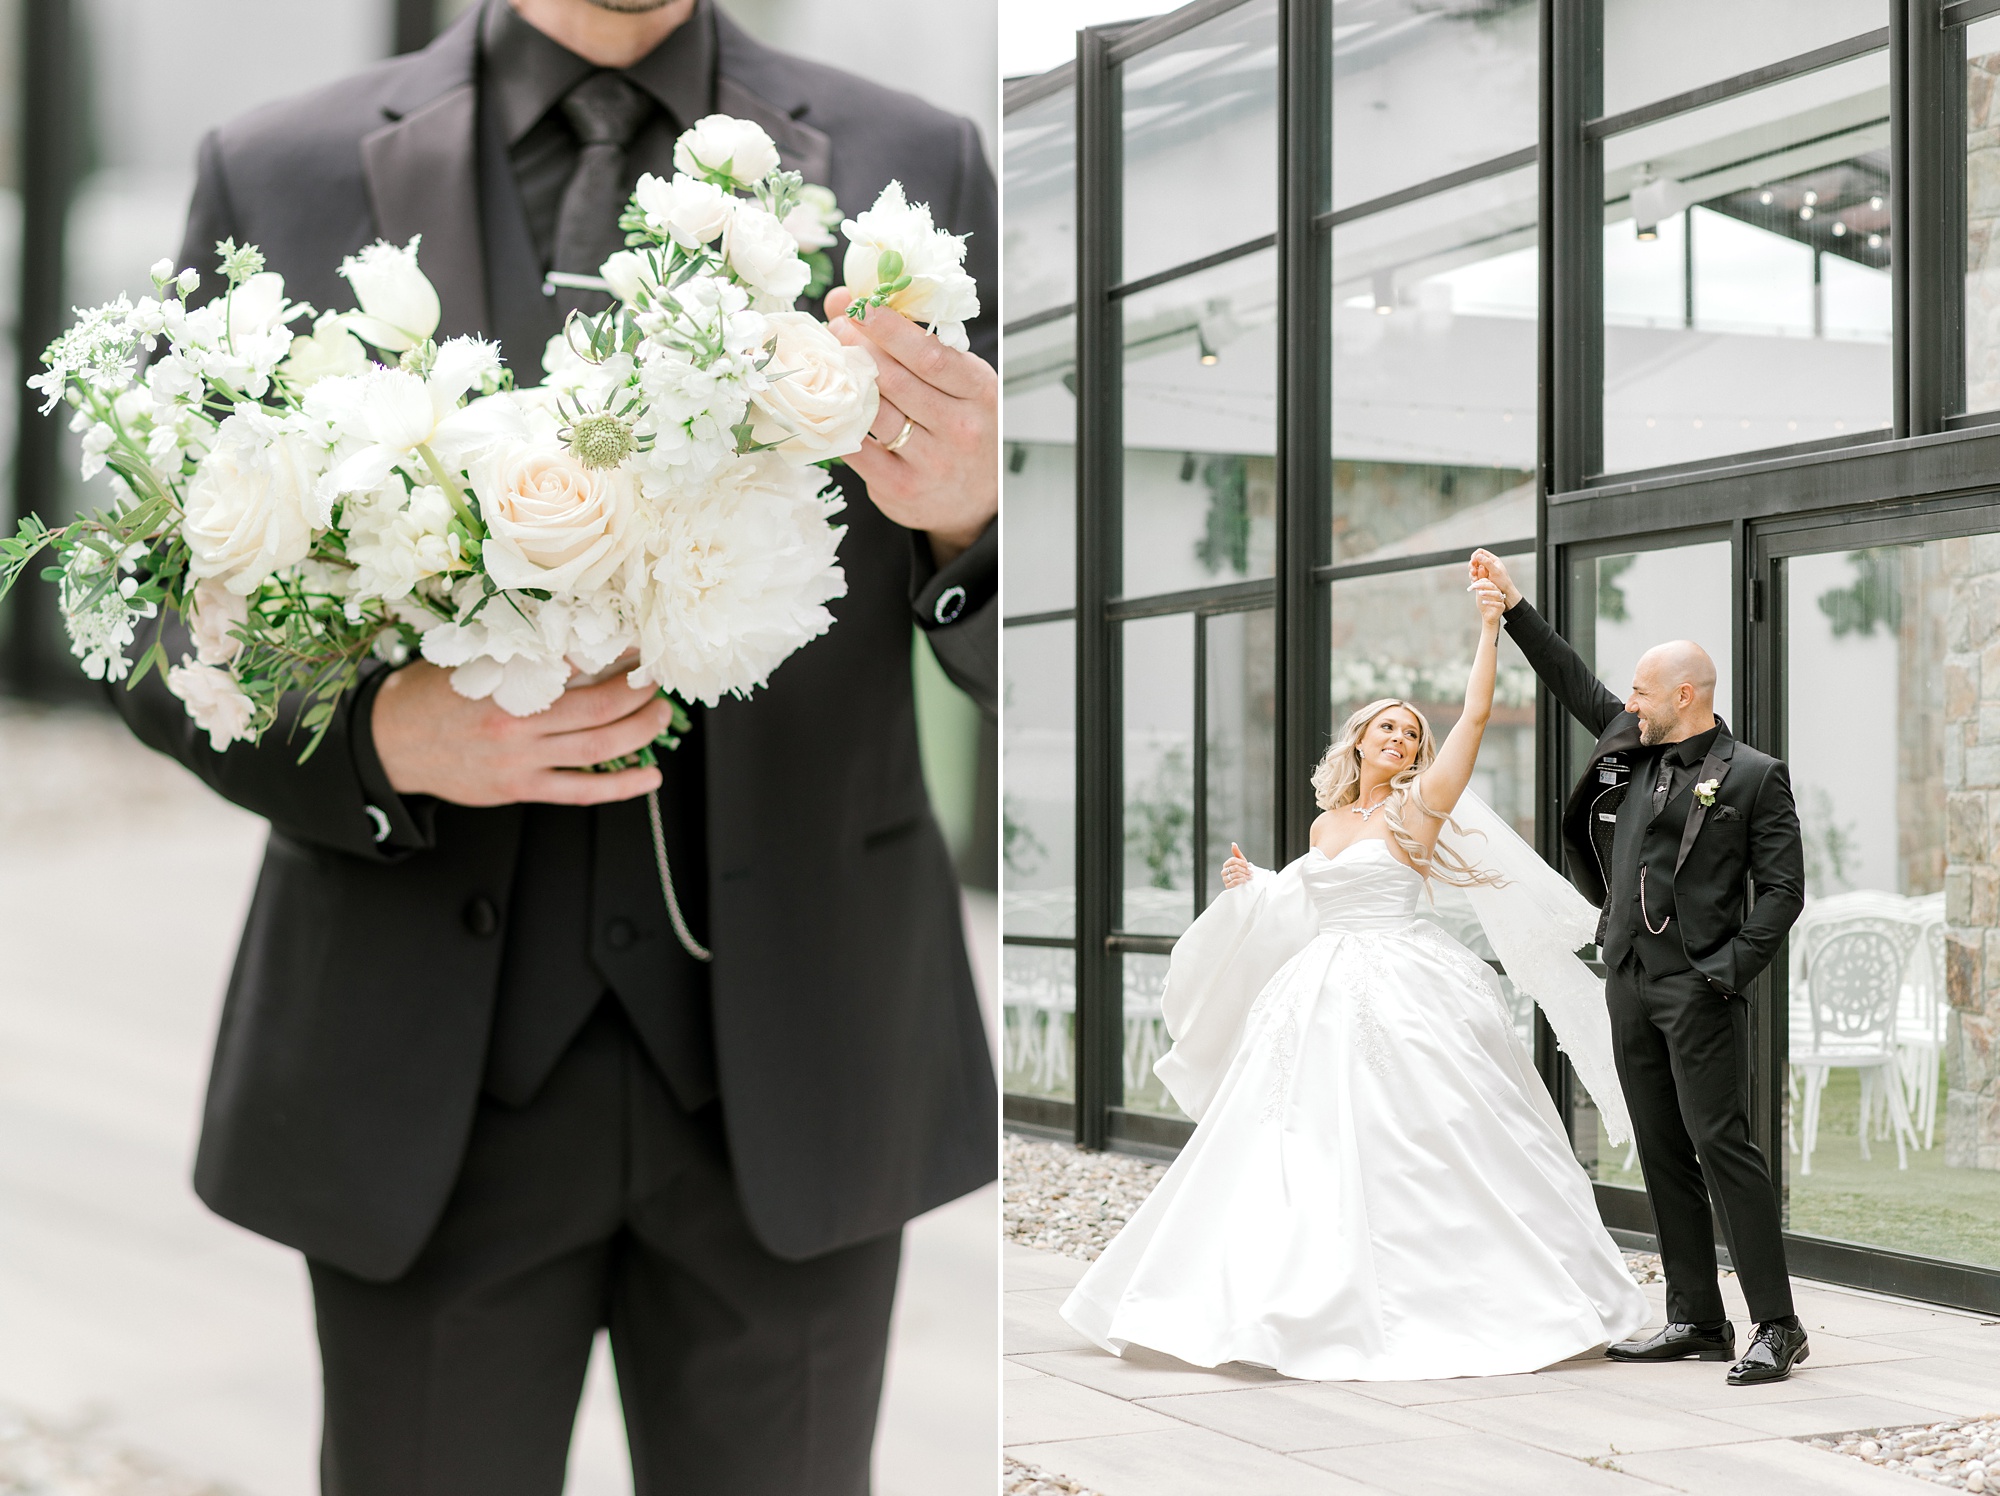 groom holds bride's bouquet of white and pale wildflowers